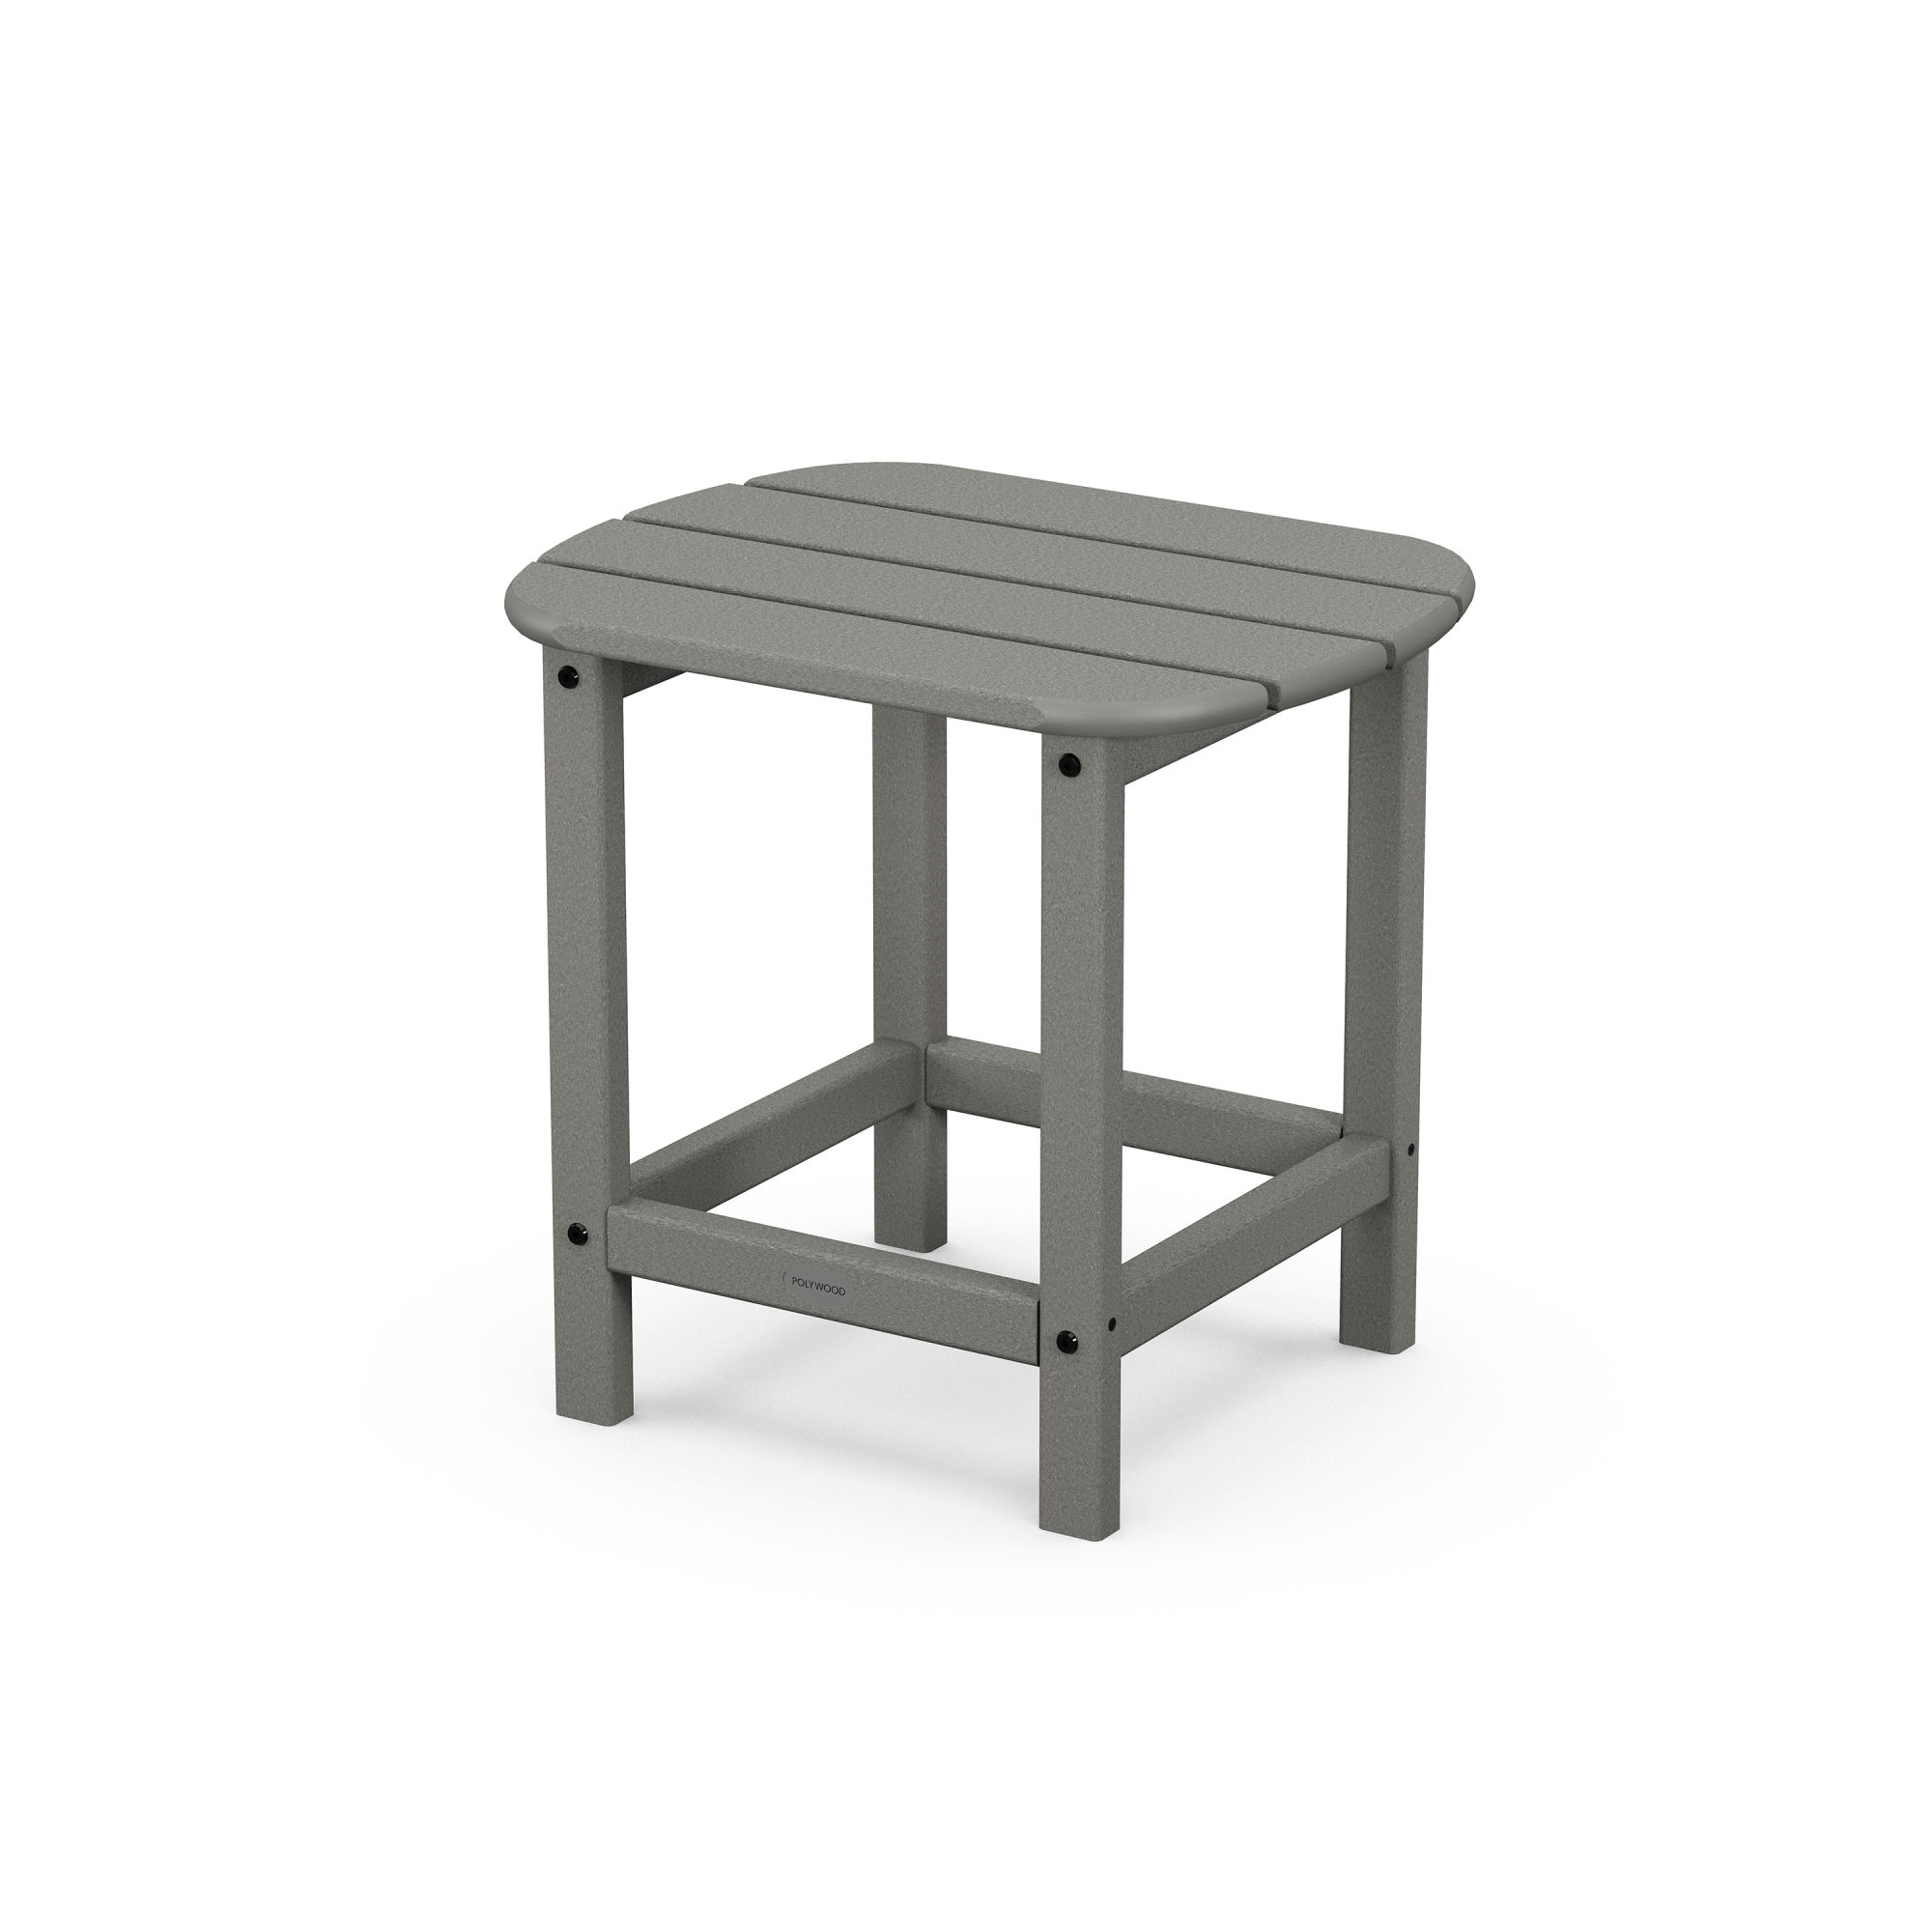 Poly Lumber Outdoor End Stand Side Table 2 Tier Handmade 18 Color Options 